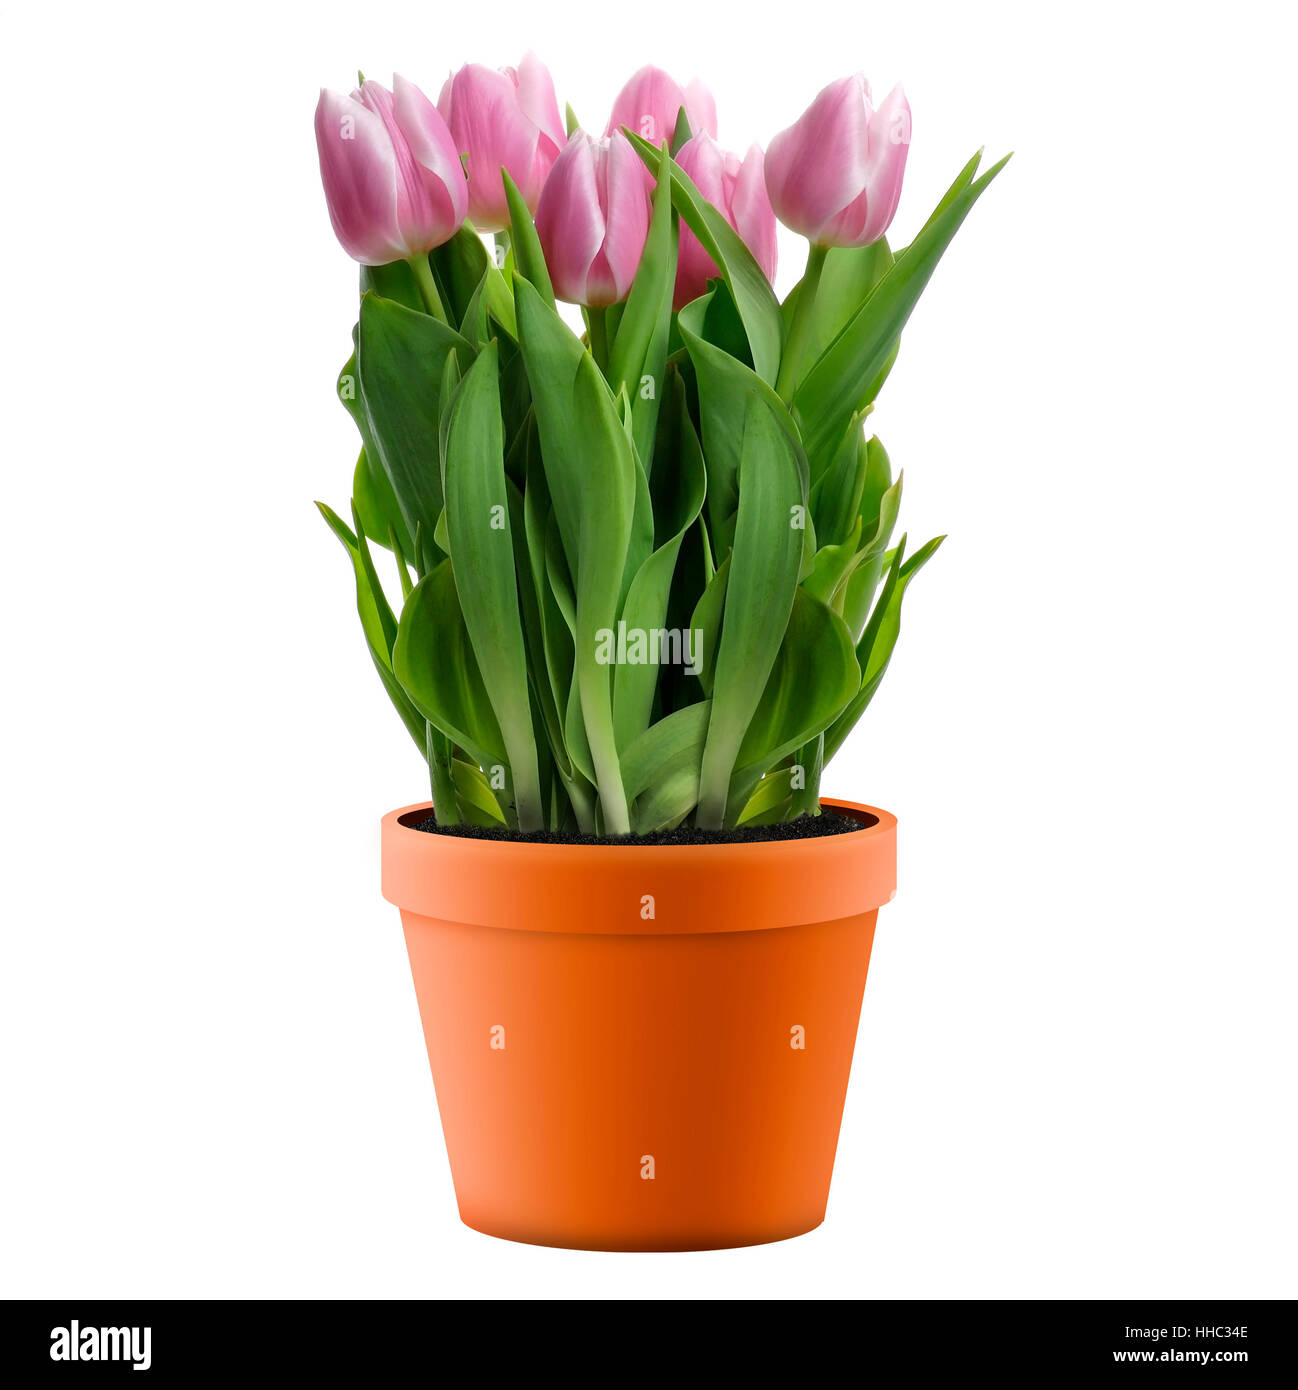 flower, plant, flora, spring, tulip, floral, nature, leaf, isolated, flower, Stock Photo